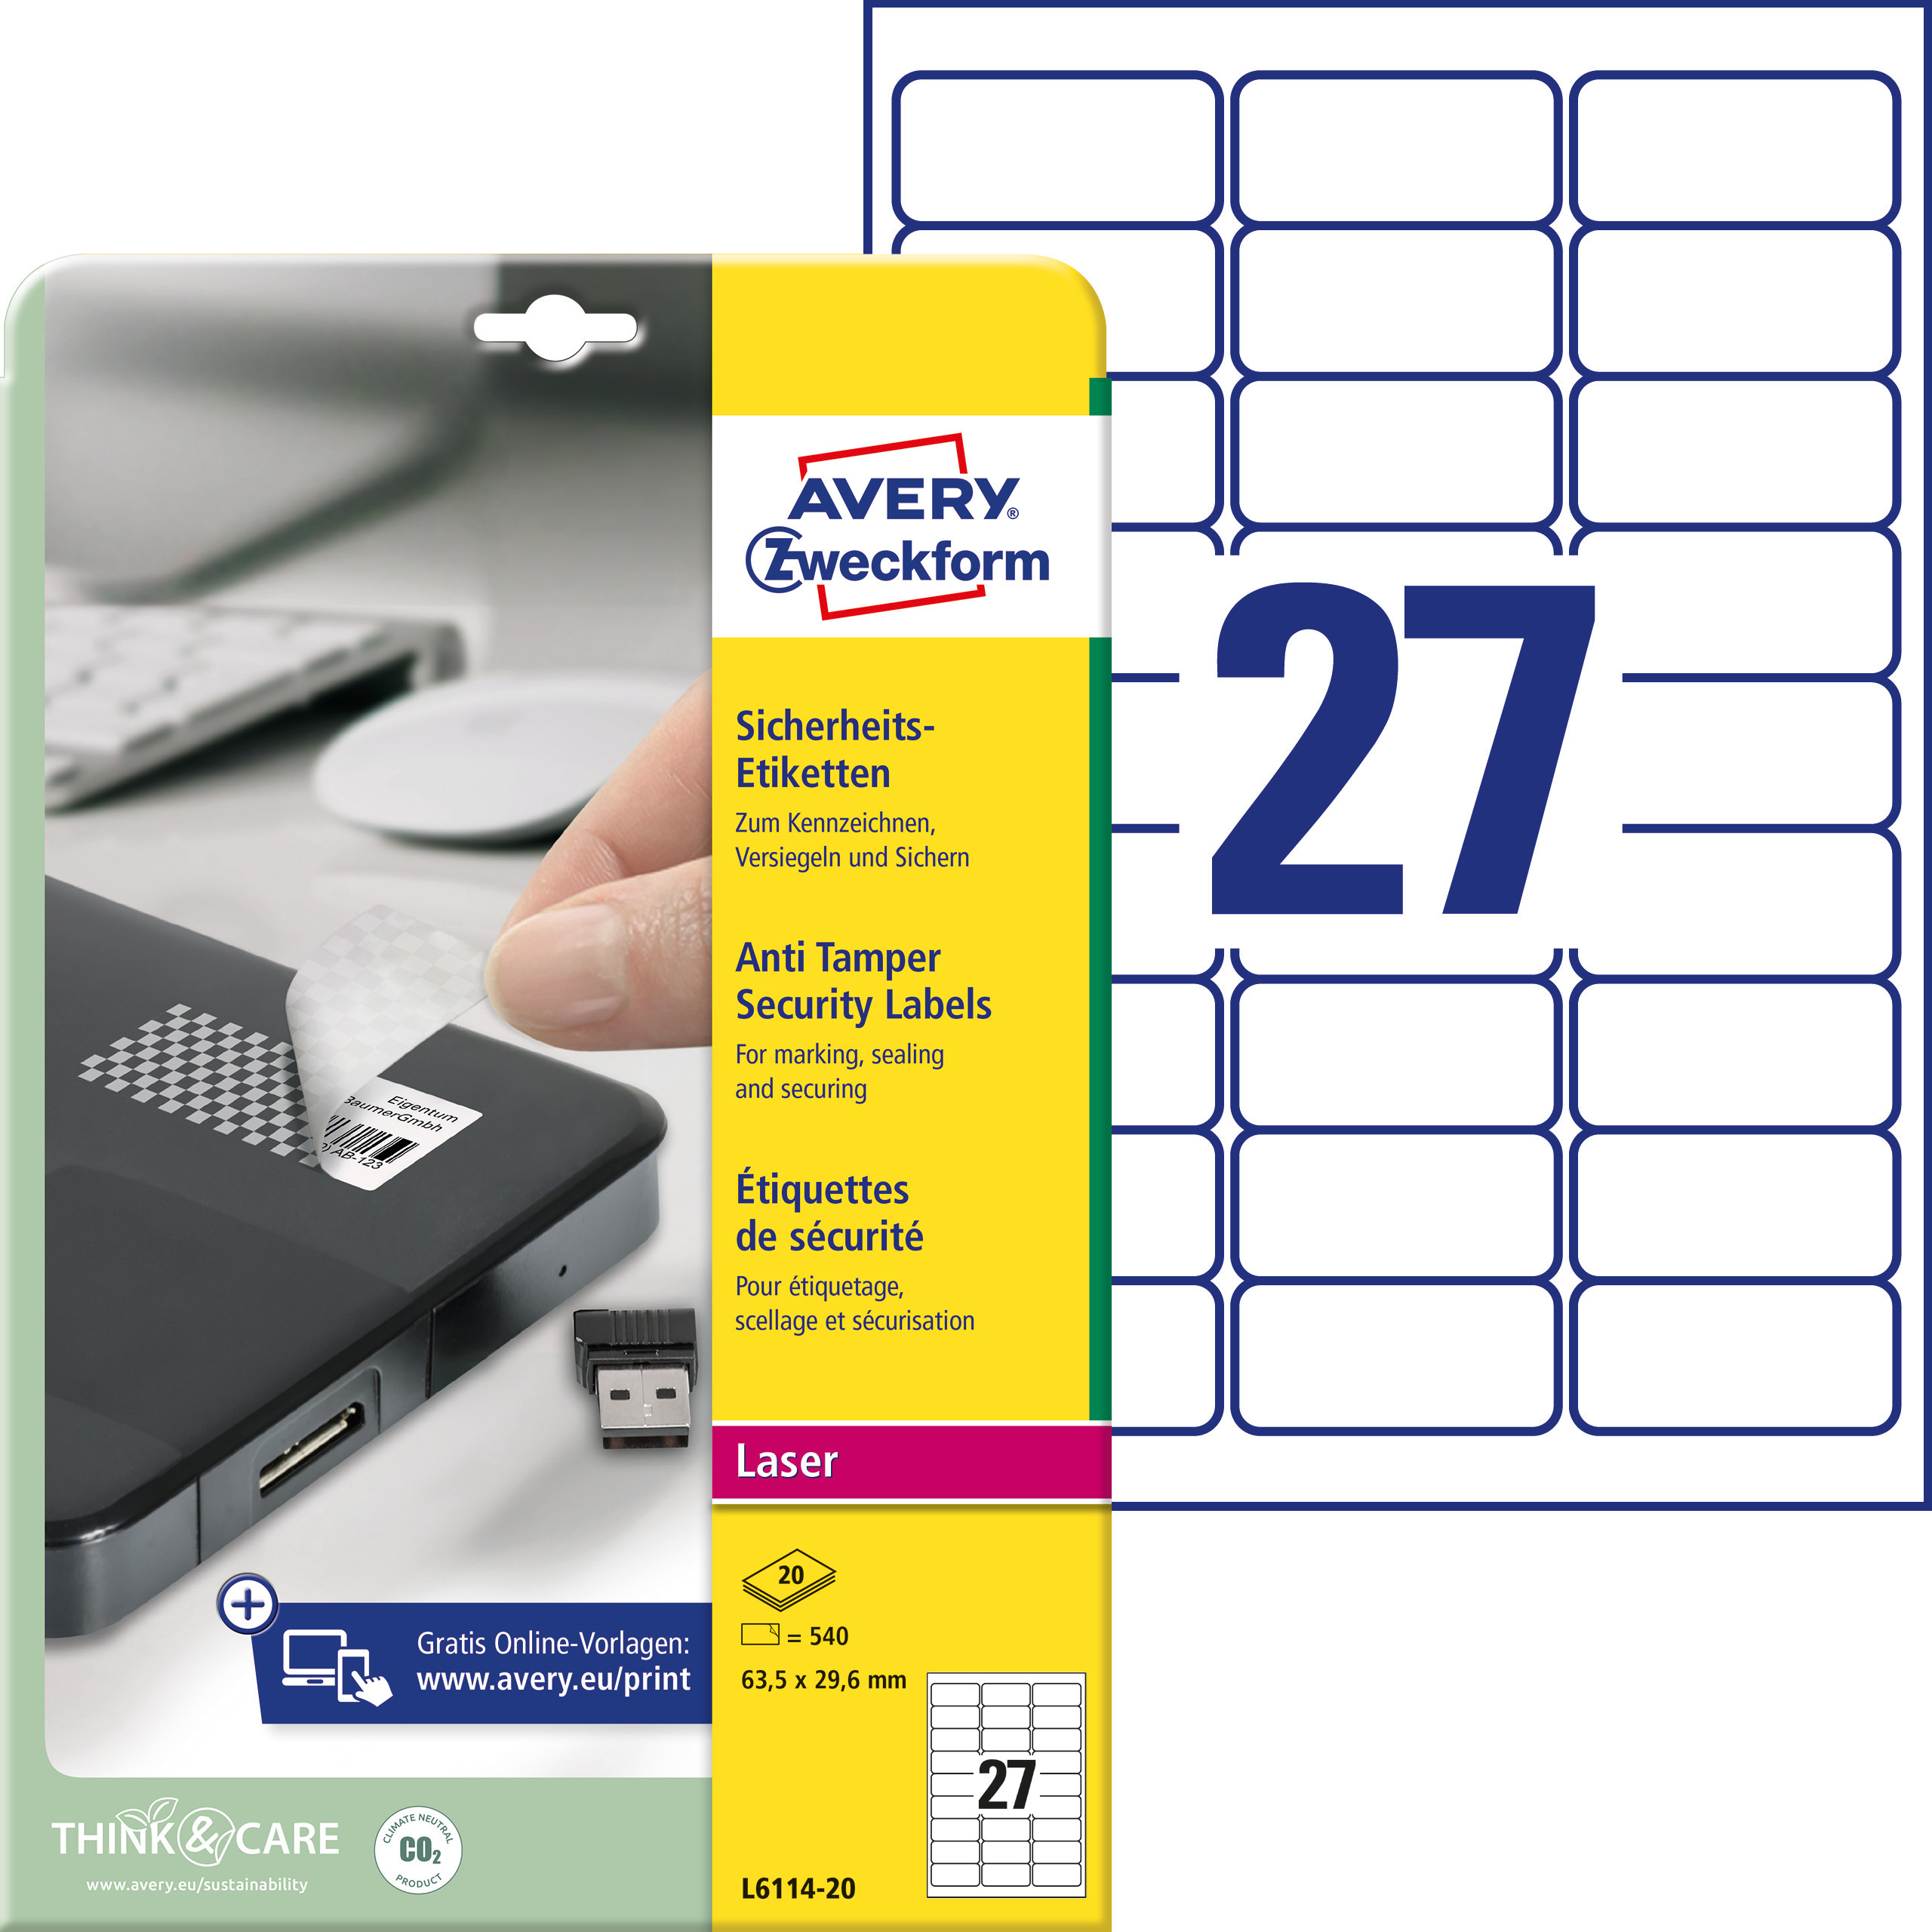 Self-adhesive durable labels polyester film for laser printers and copiers - 27 labels per sheet